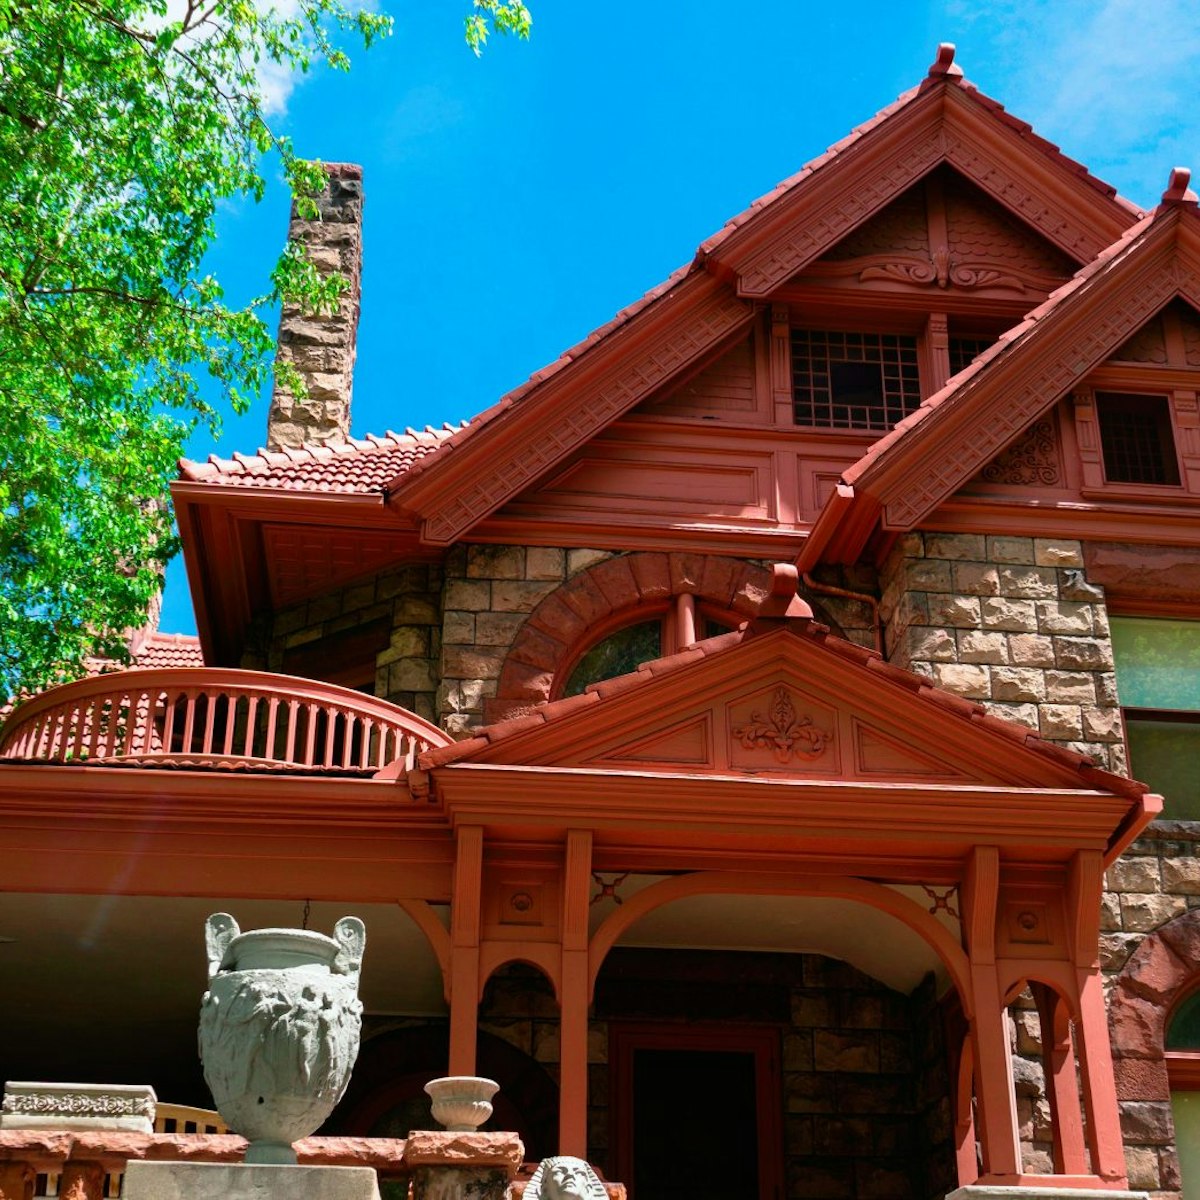 Denver, USA - May 4, 2014: The home of the famous Unsinkable Molly Brown in the  historic Capitol Hill Neighborhood in Denver, Colorado. Molly Brown gained fame by surviving the sinking of the Titanic. Molly Brown house
